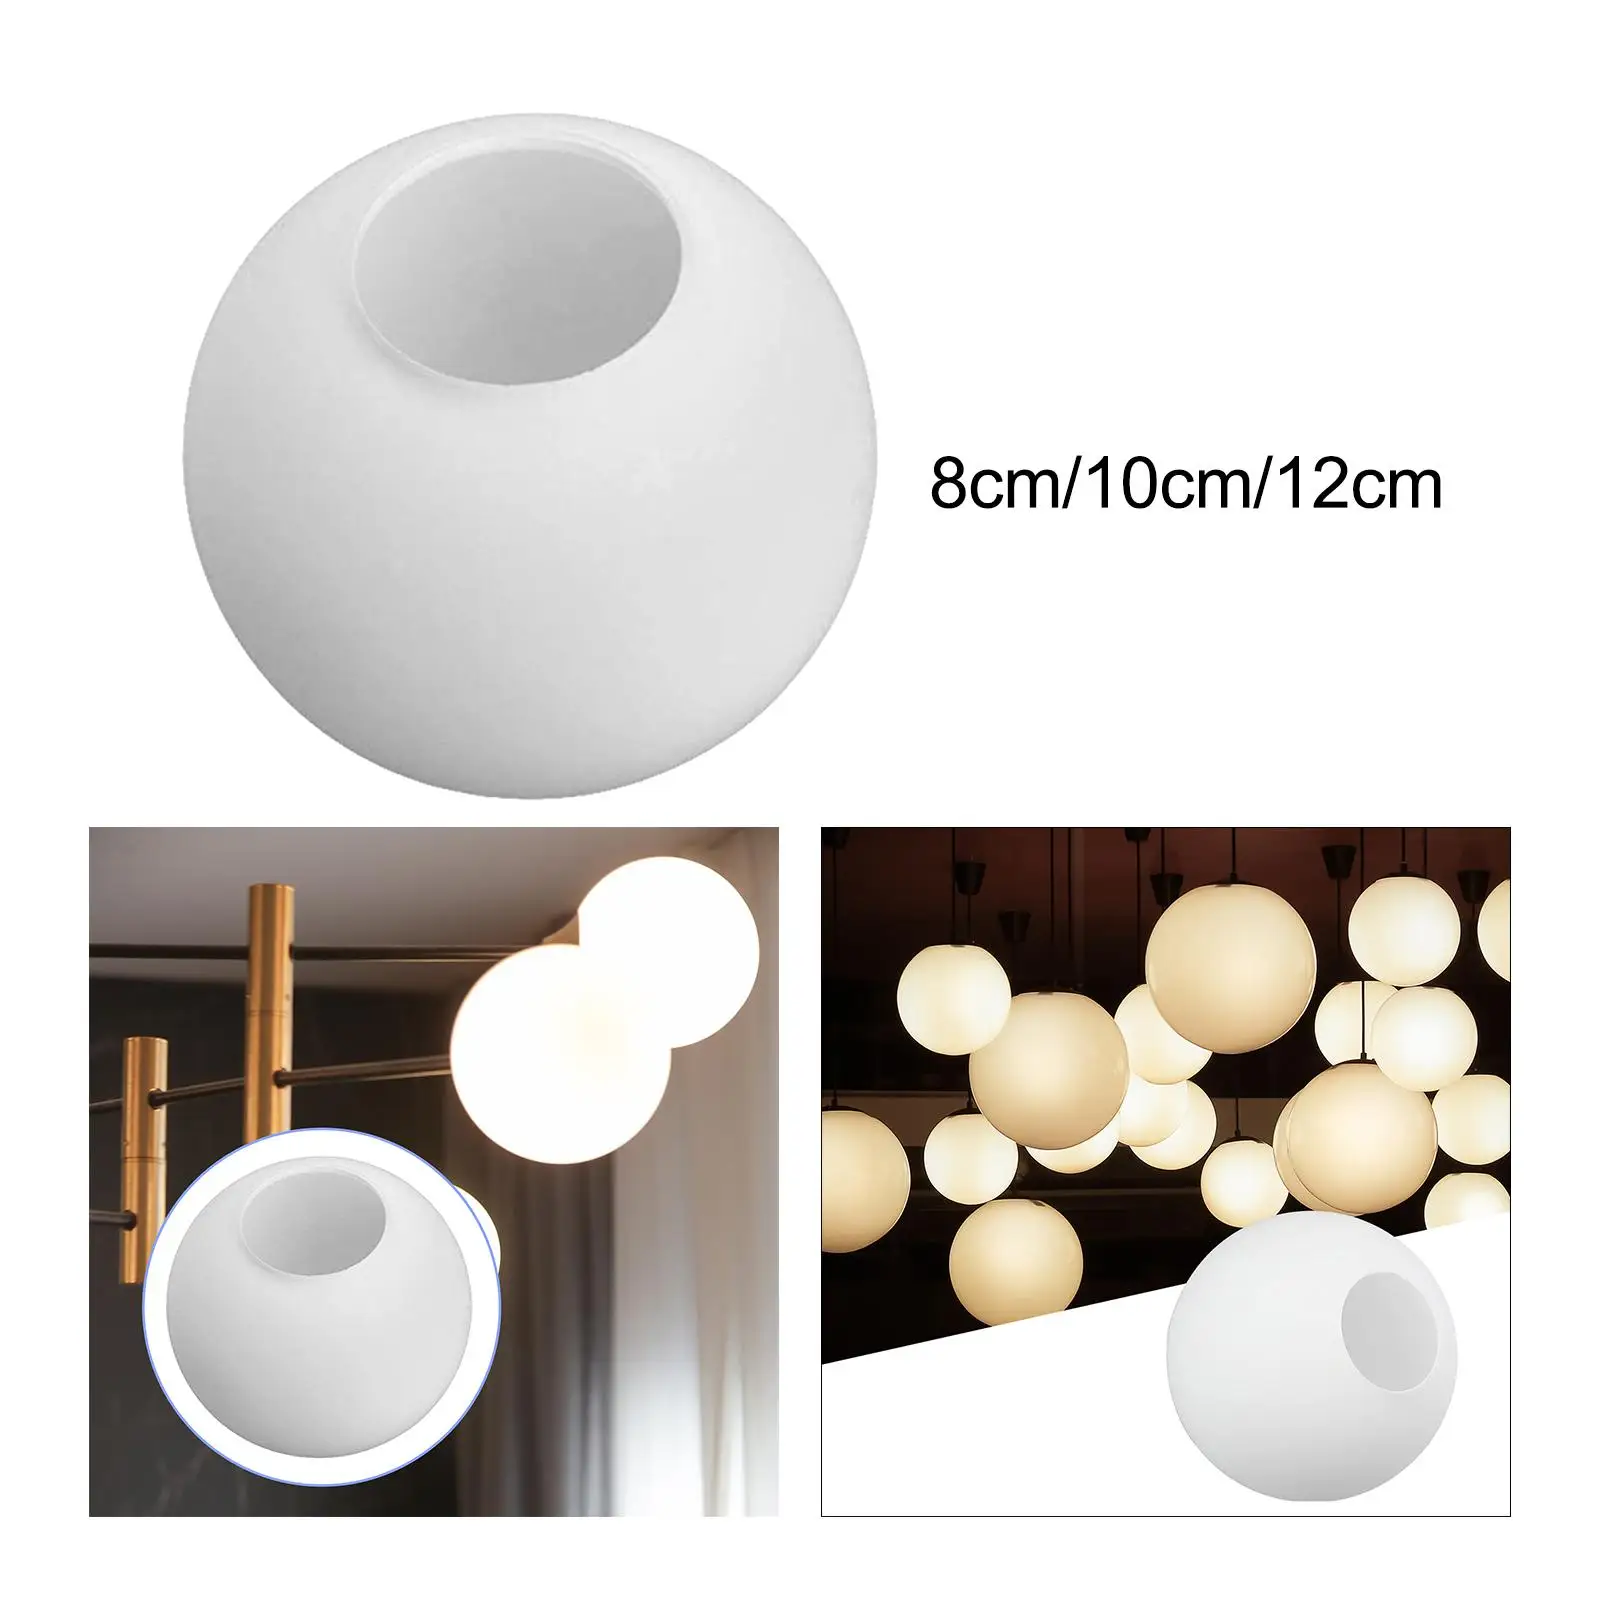 White Globe Lampshade Round Chandelier Light Cover Fixture Cover Shade for